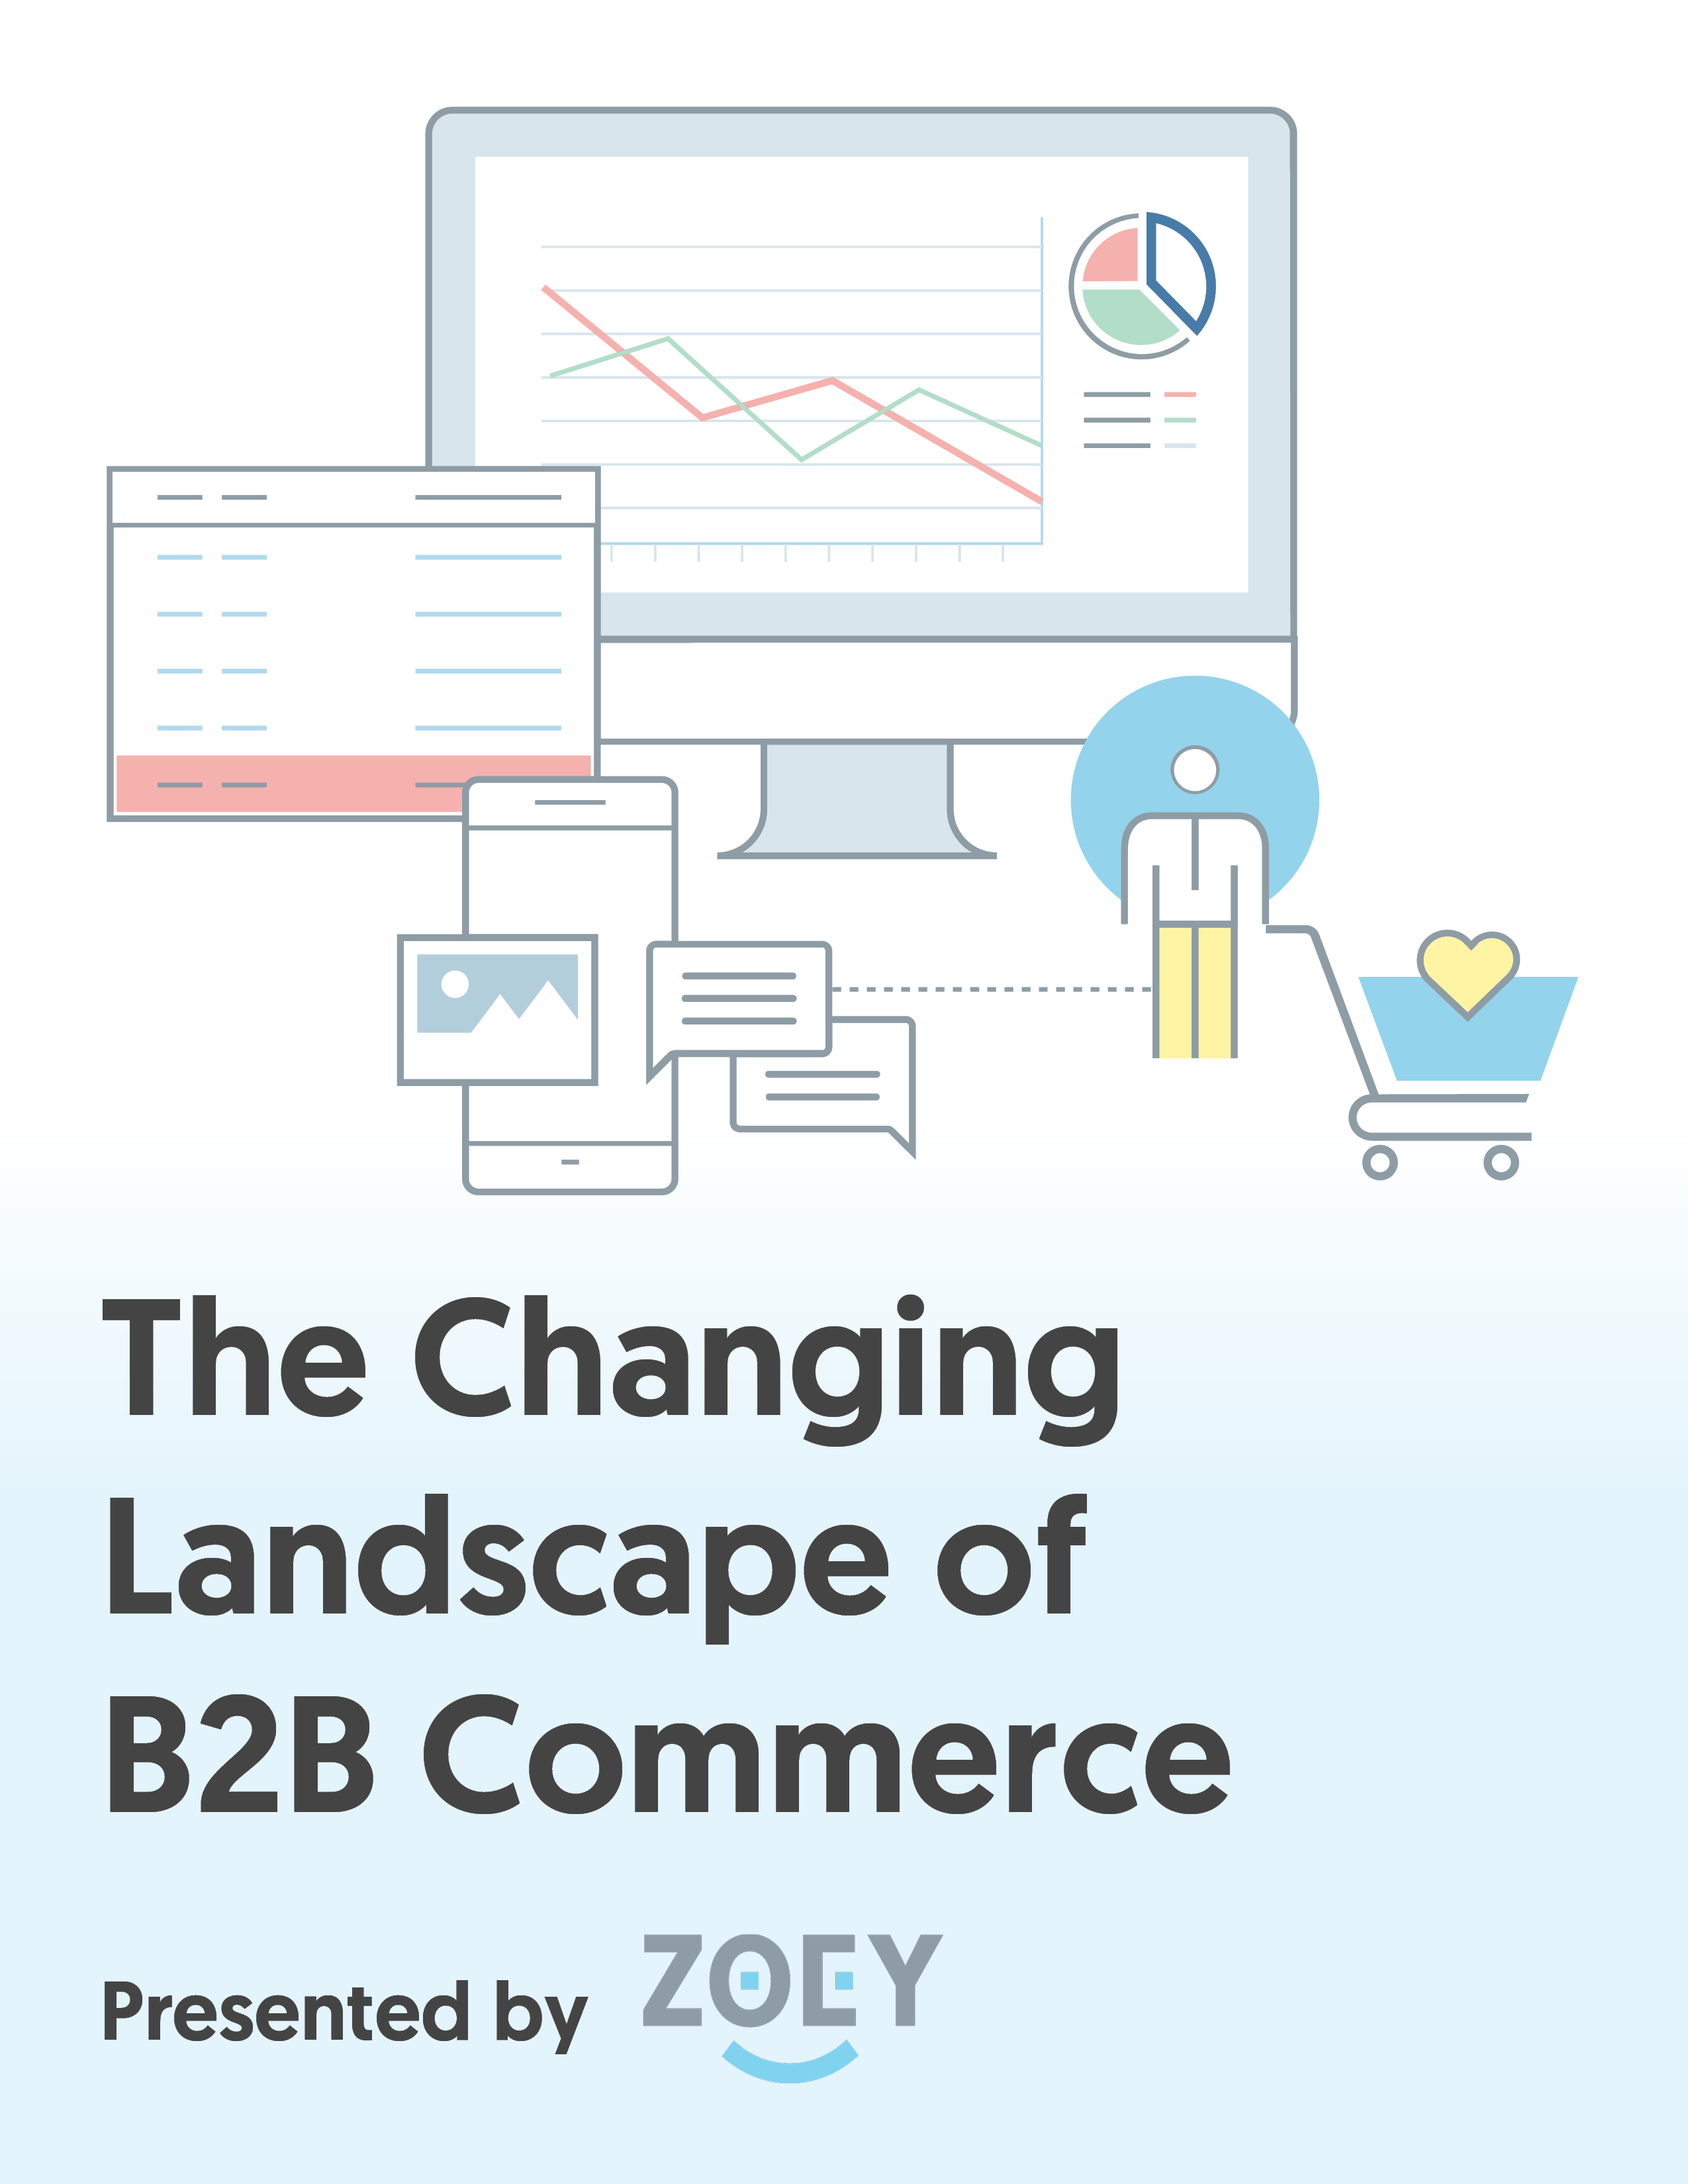 The Changing Landscape of B2B Commerce